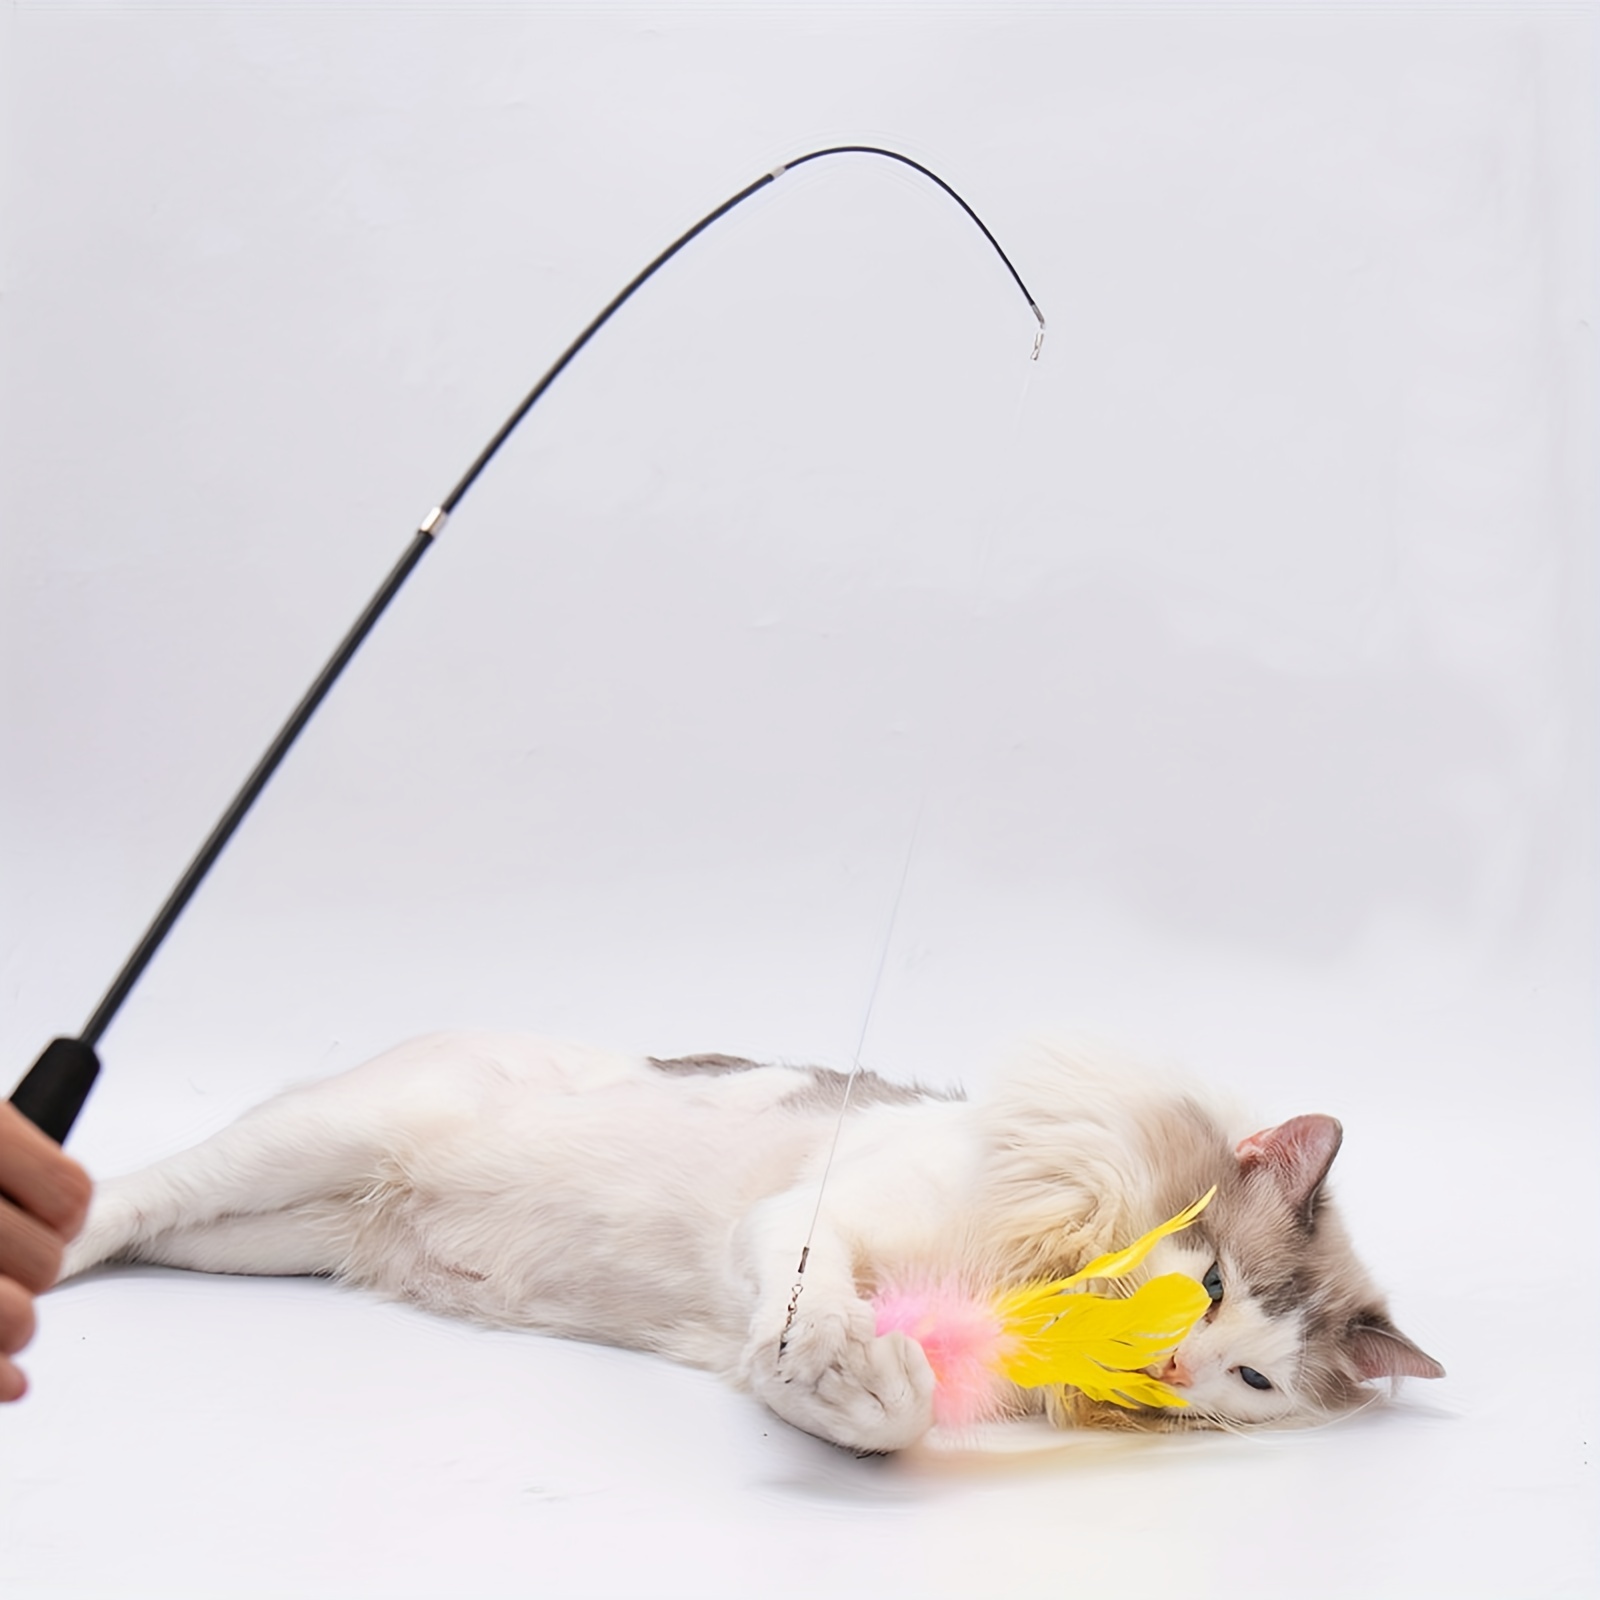 Pulley Telescopic Cat Fishing Pole Toy, Retractable Cat Teaser Wand Toy,  Cat Interactive Toy For Indoor Interactive Kitten Wand Fishing Pole Toy,  For